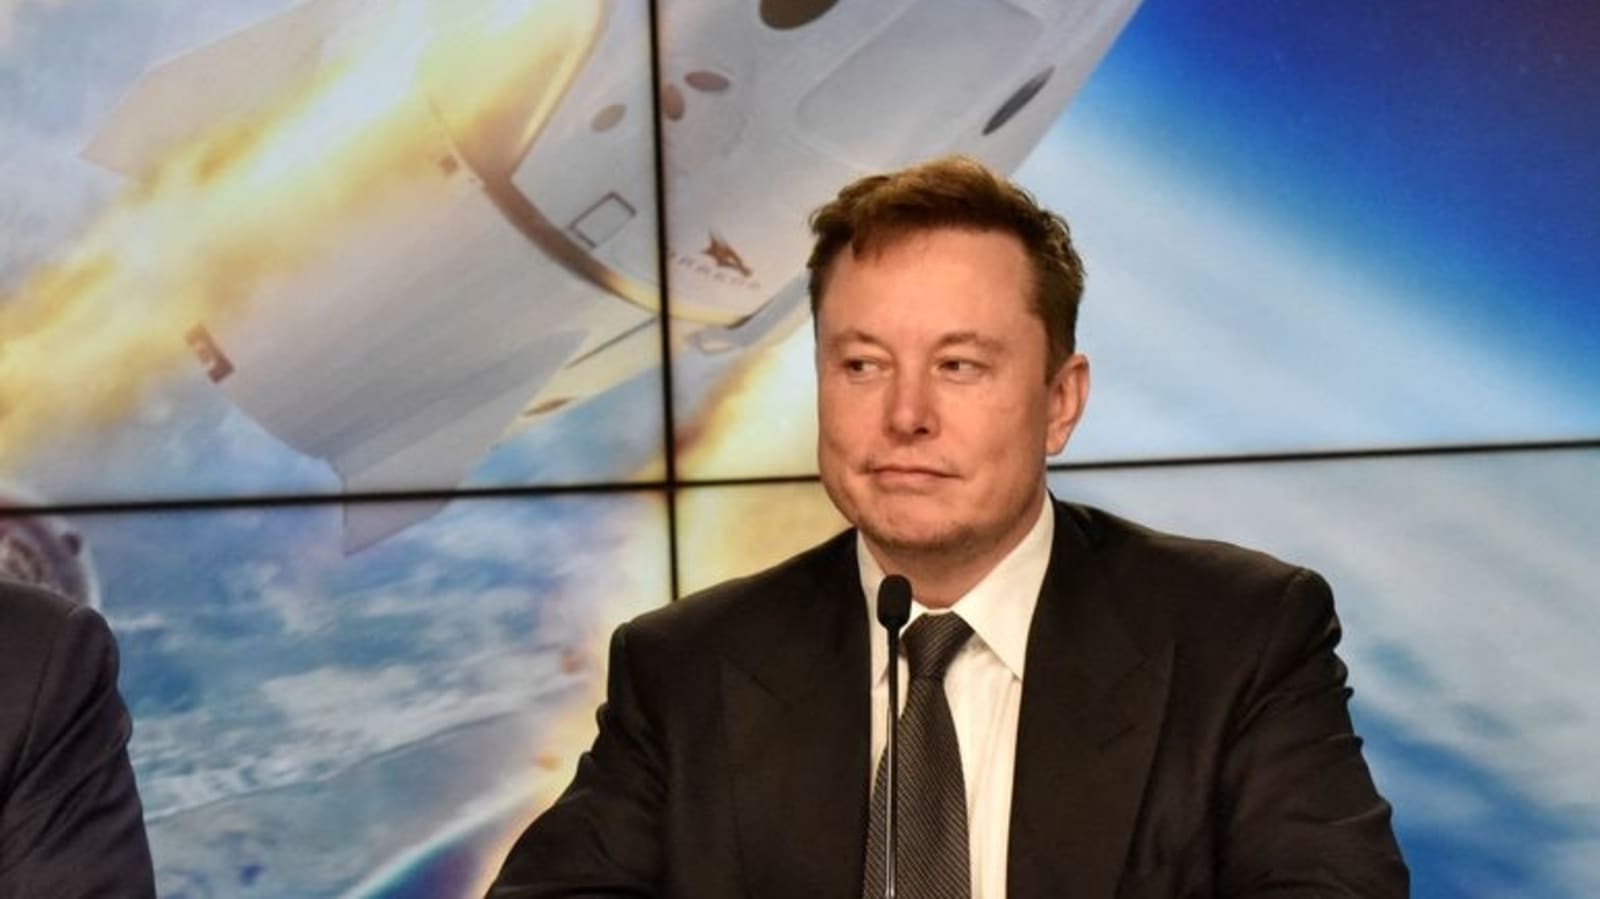 Tesla welcome in India but...: Union minister on Elon Musk's plan for EV imports